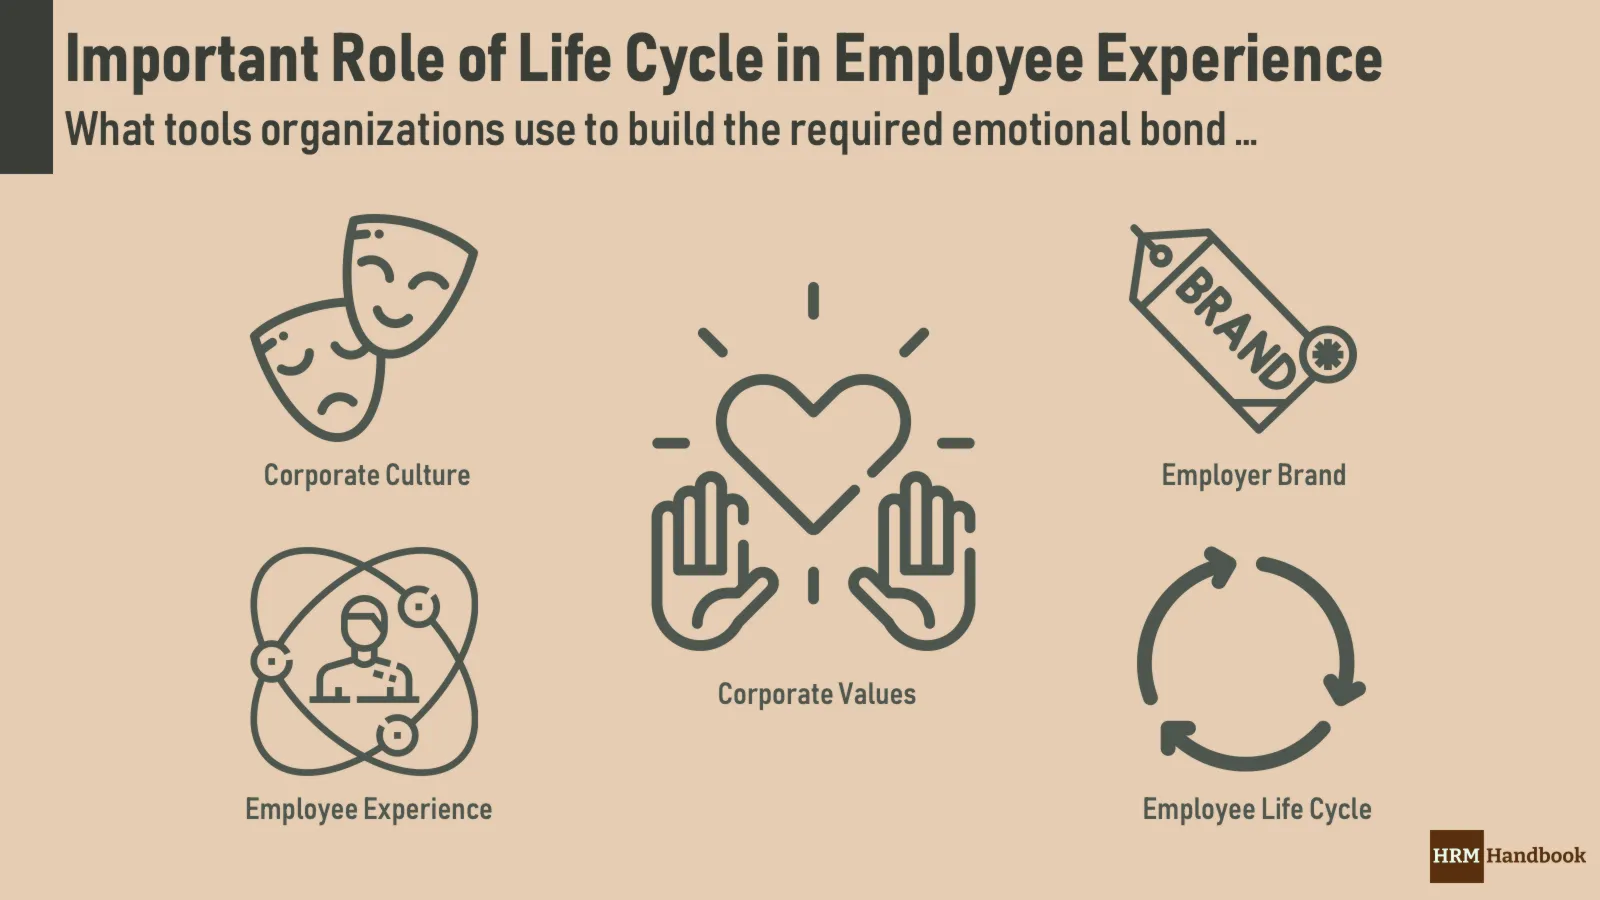 How companies use Life Cycle to build a strong emotional bond with employees